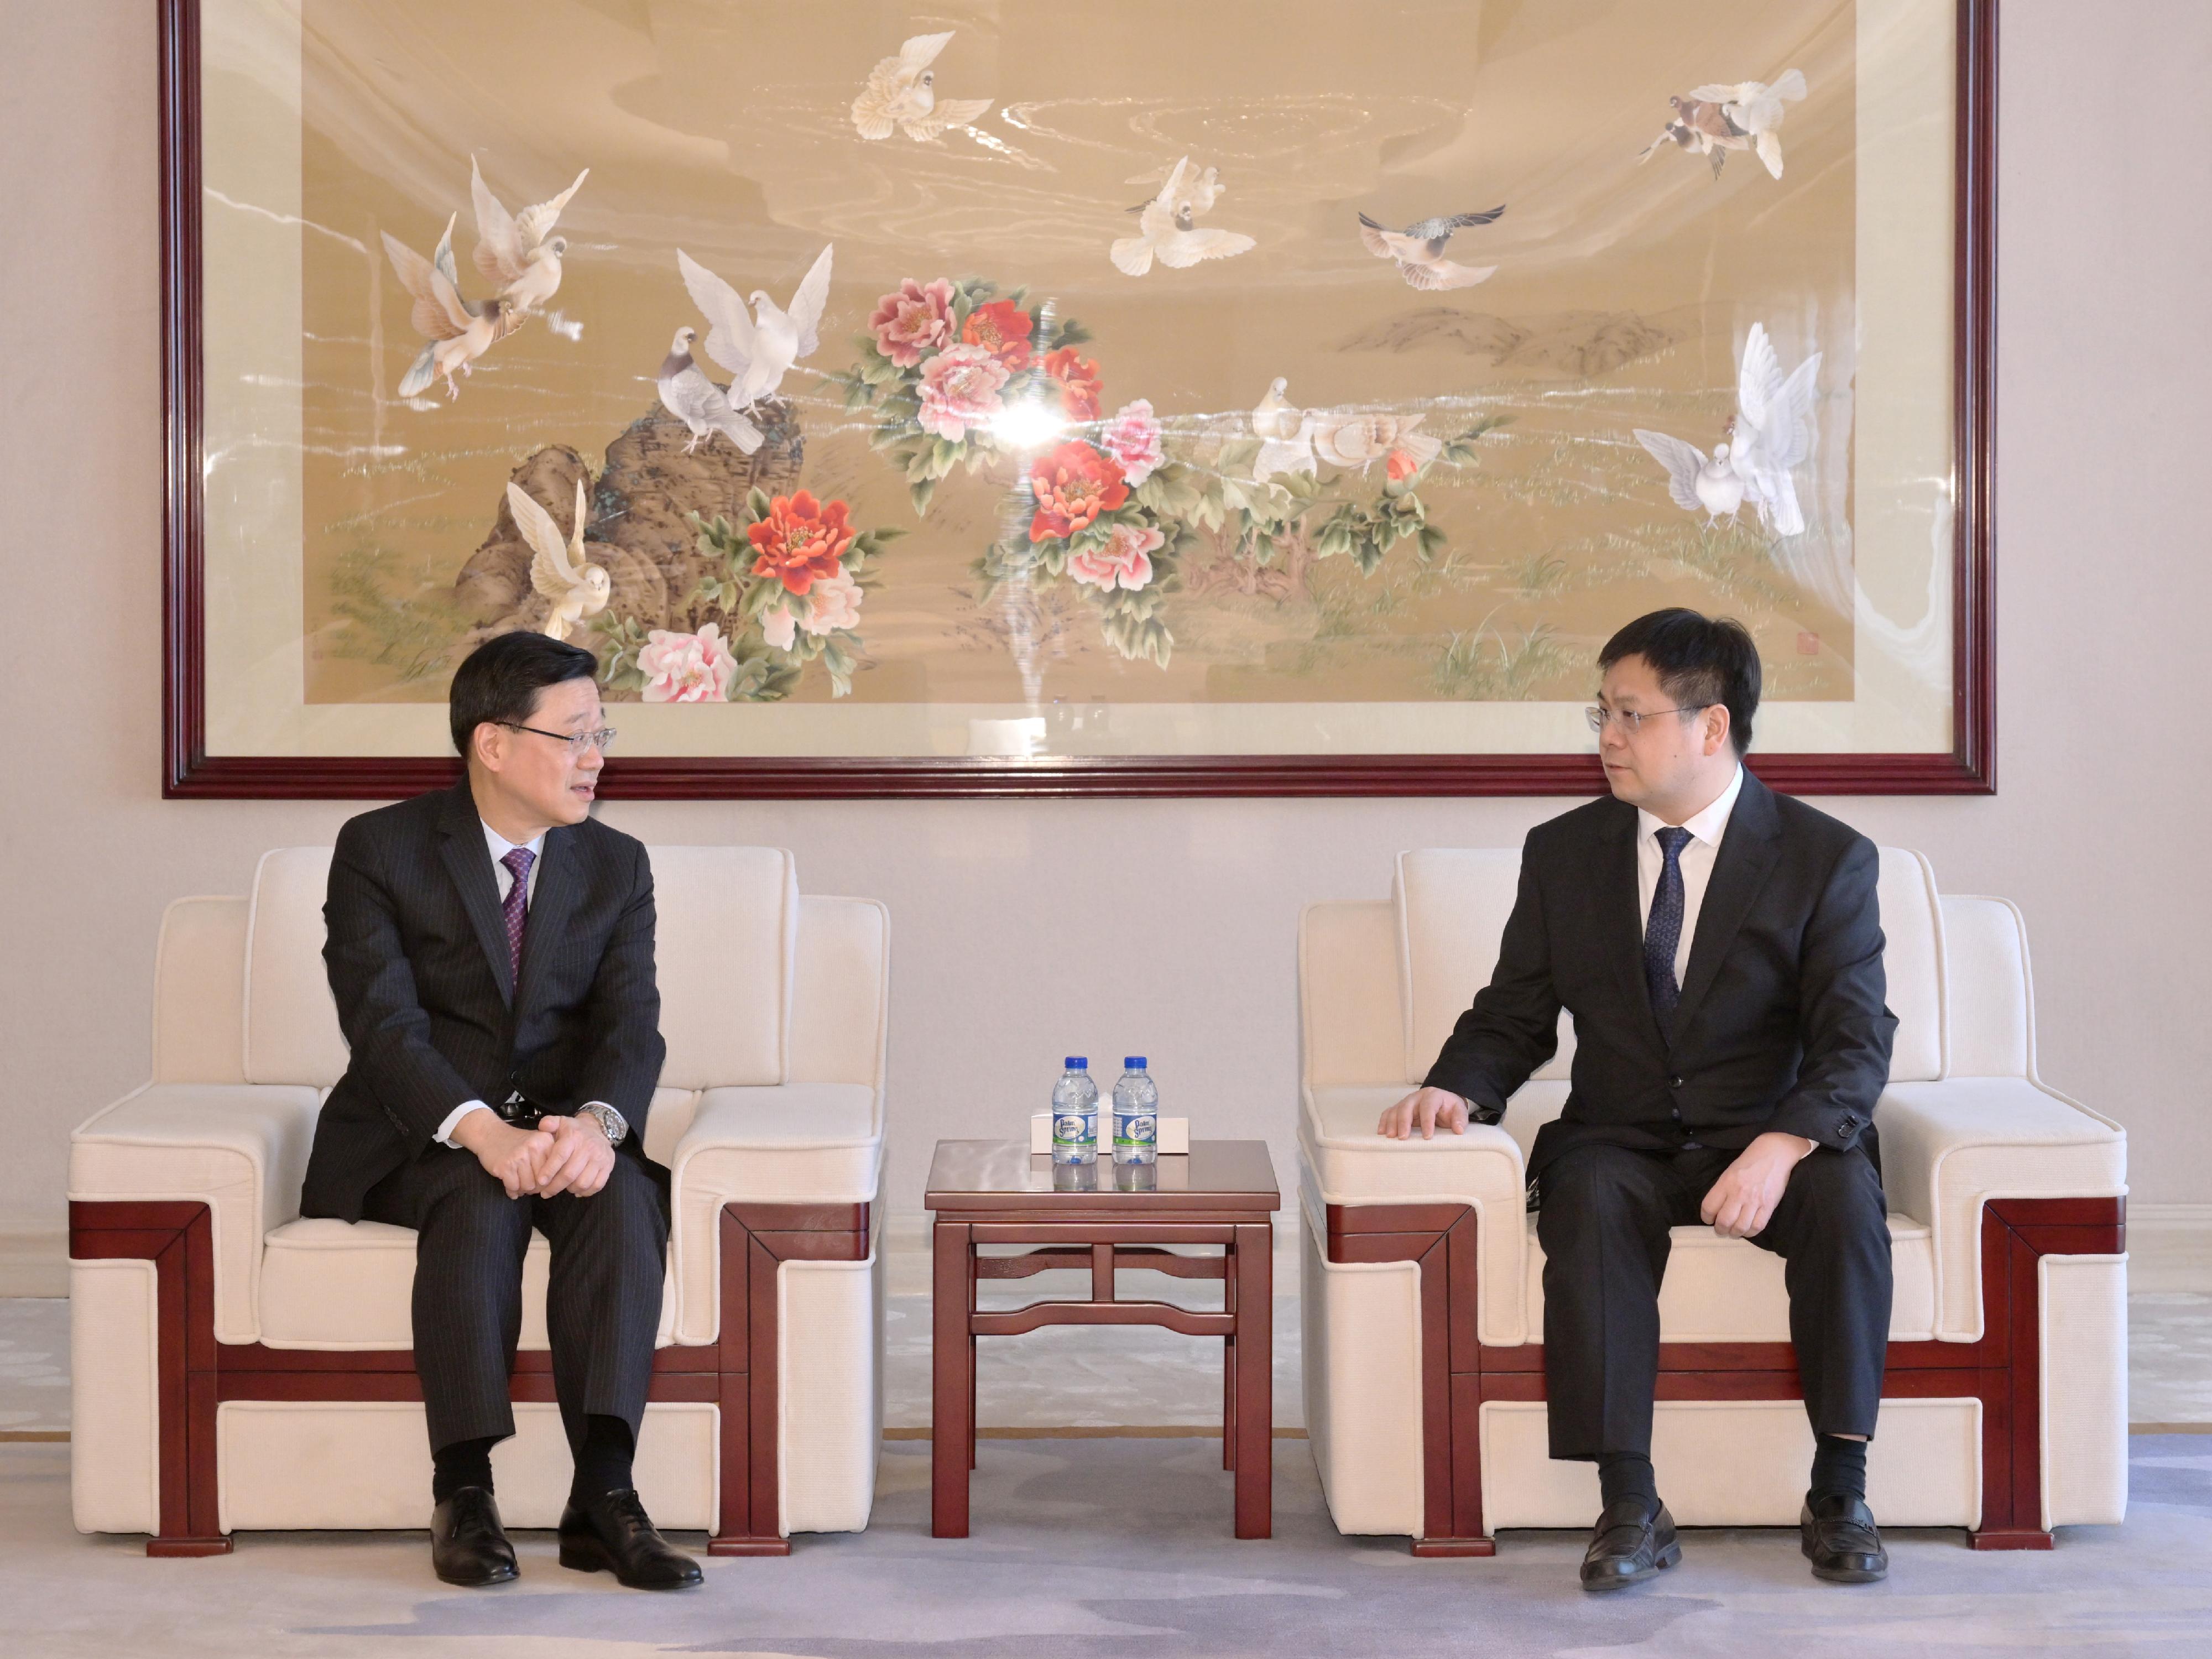 The Chief Executive, Mr John Lee, toured the China-UAE Industrial Capacity Cooperation Demonstration Zone at the Khalifa Industrial Zone in Abu Dhabi, the United Arab Emirates, today (February 8, Abu Dhabi time). Photo shows Mr Lee (left) meeting with the Chairman of China Jiangsu International Economic and Technical Cooperation Group, Mr Song Qinbo (right).